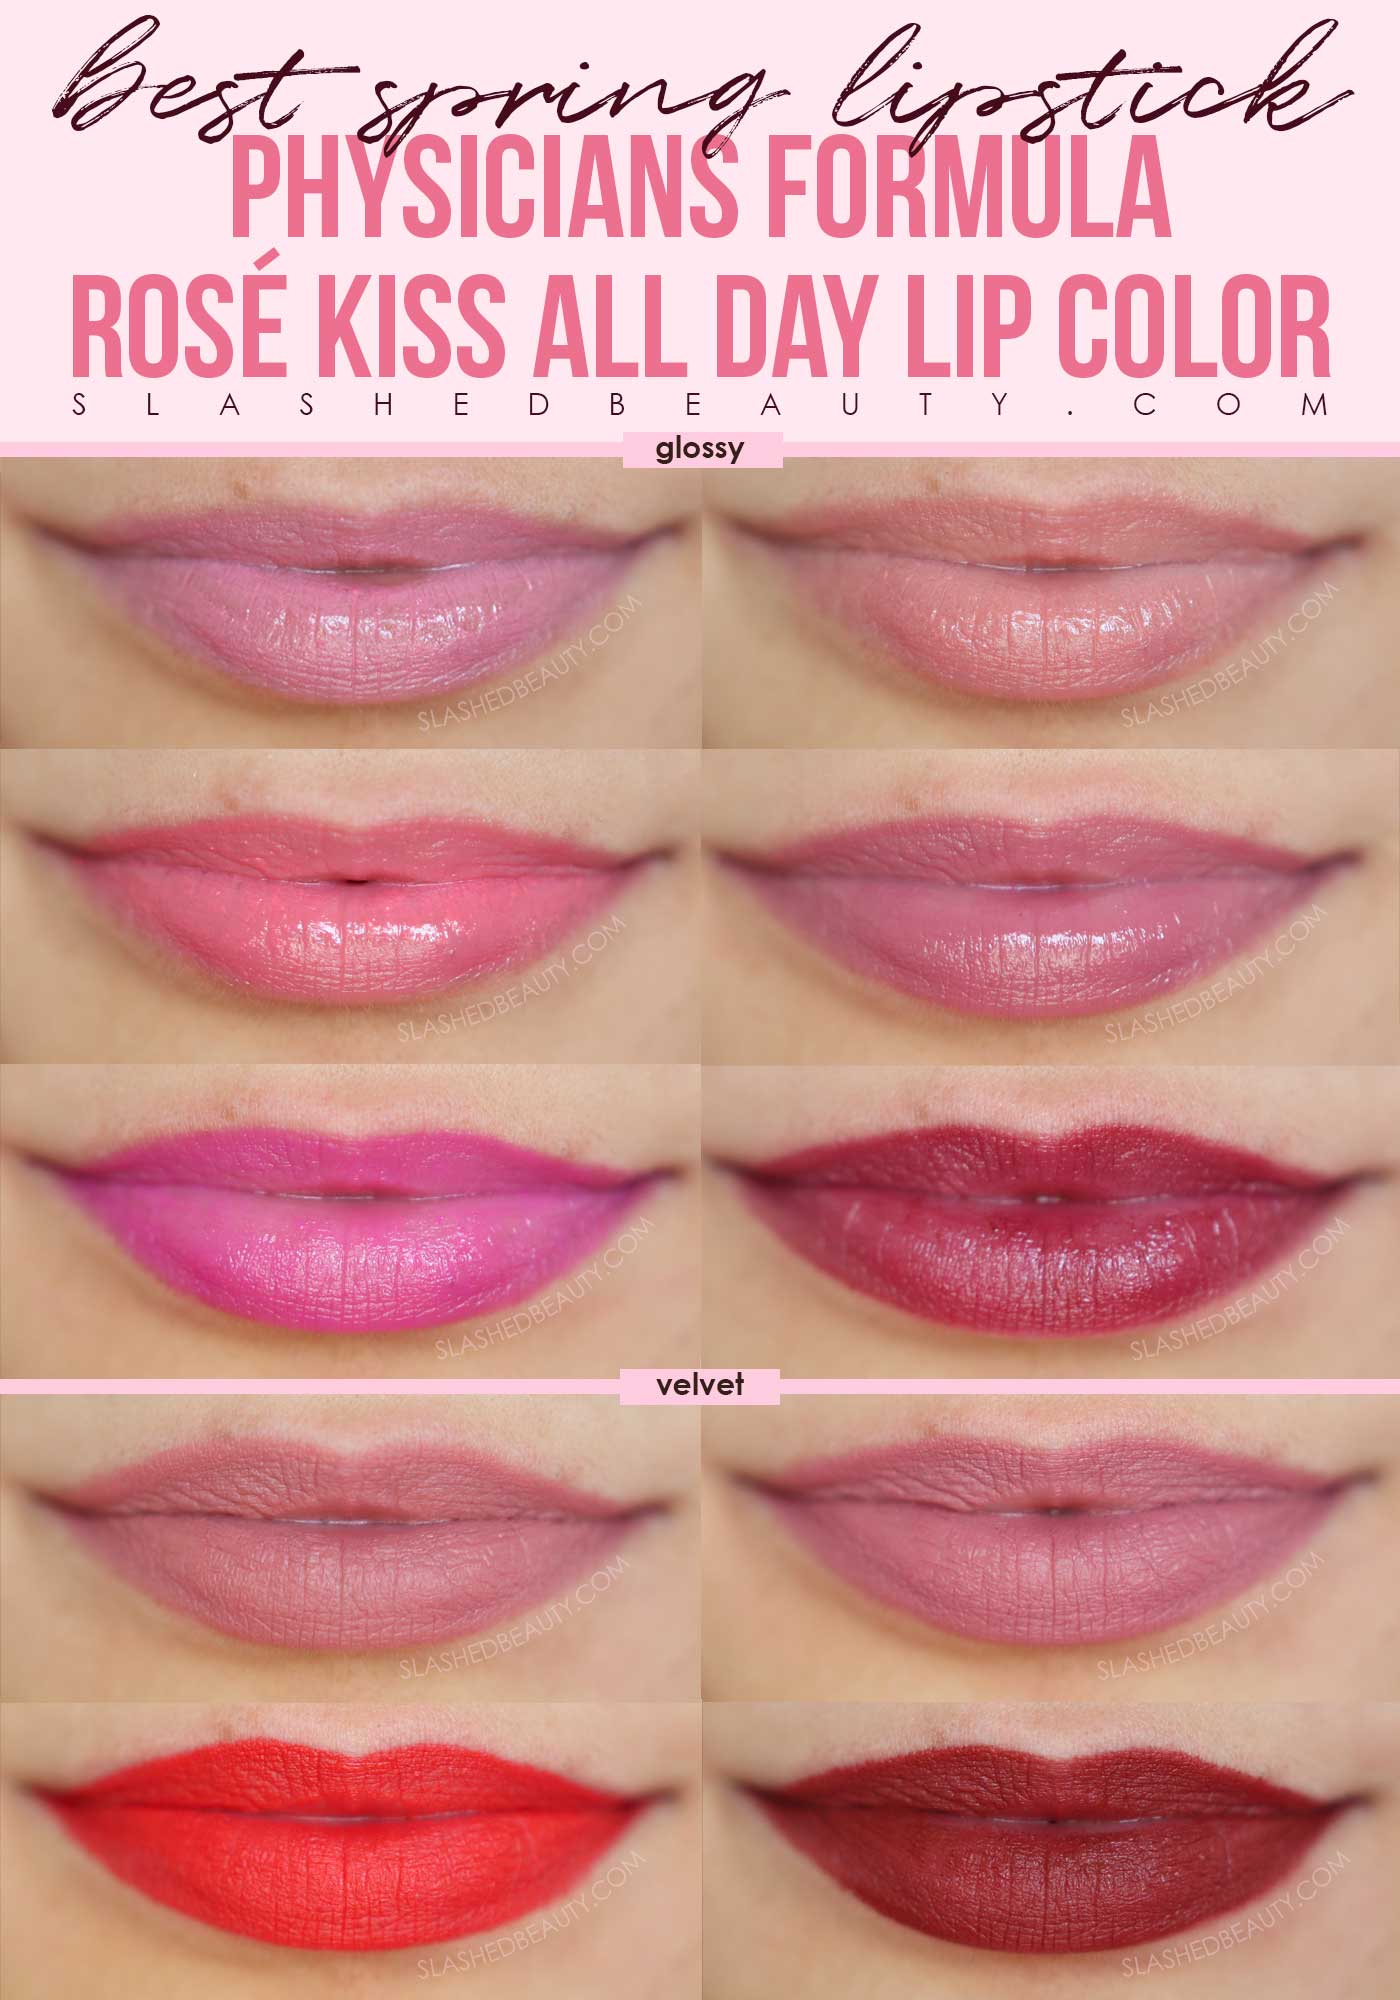 Physicians Formula Rosé Kiss All Day Lip Swatches & Review | Best Spring Lipstick | Slashed Beauty